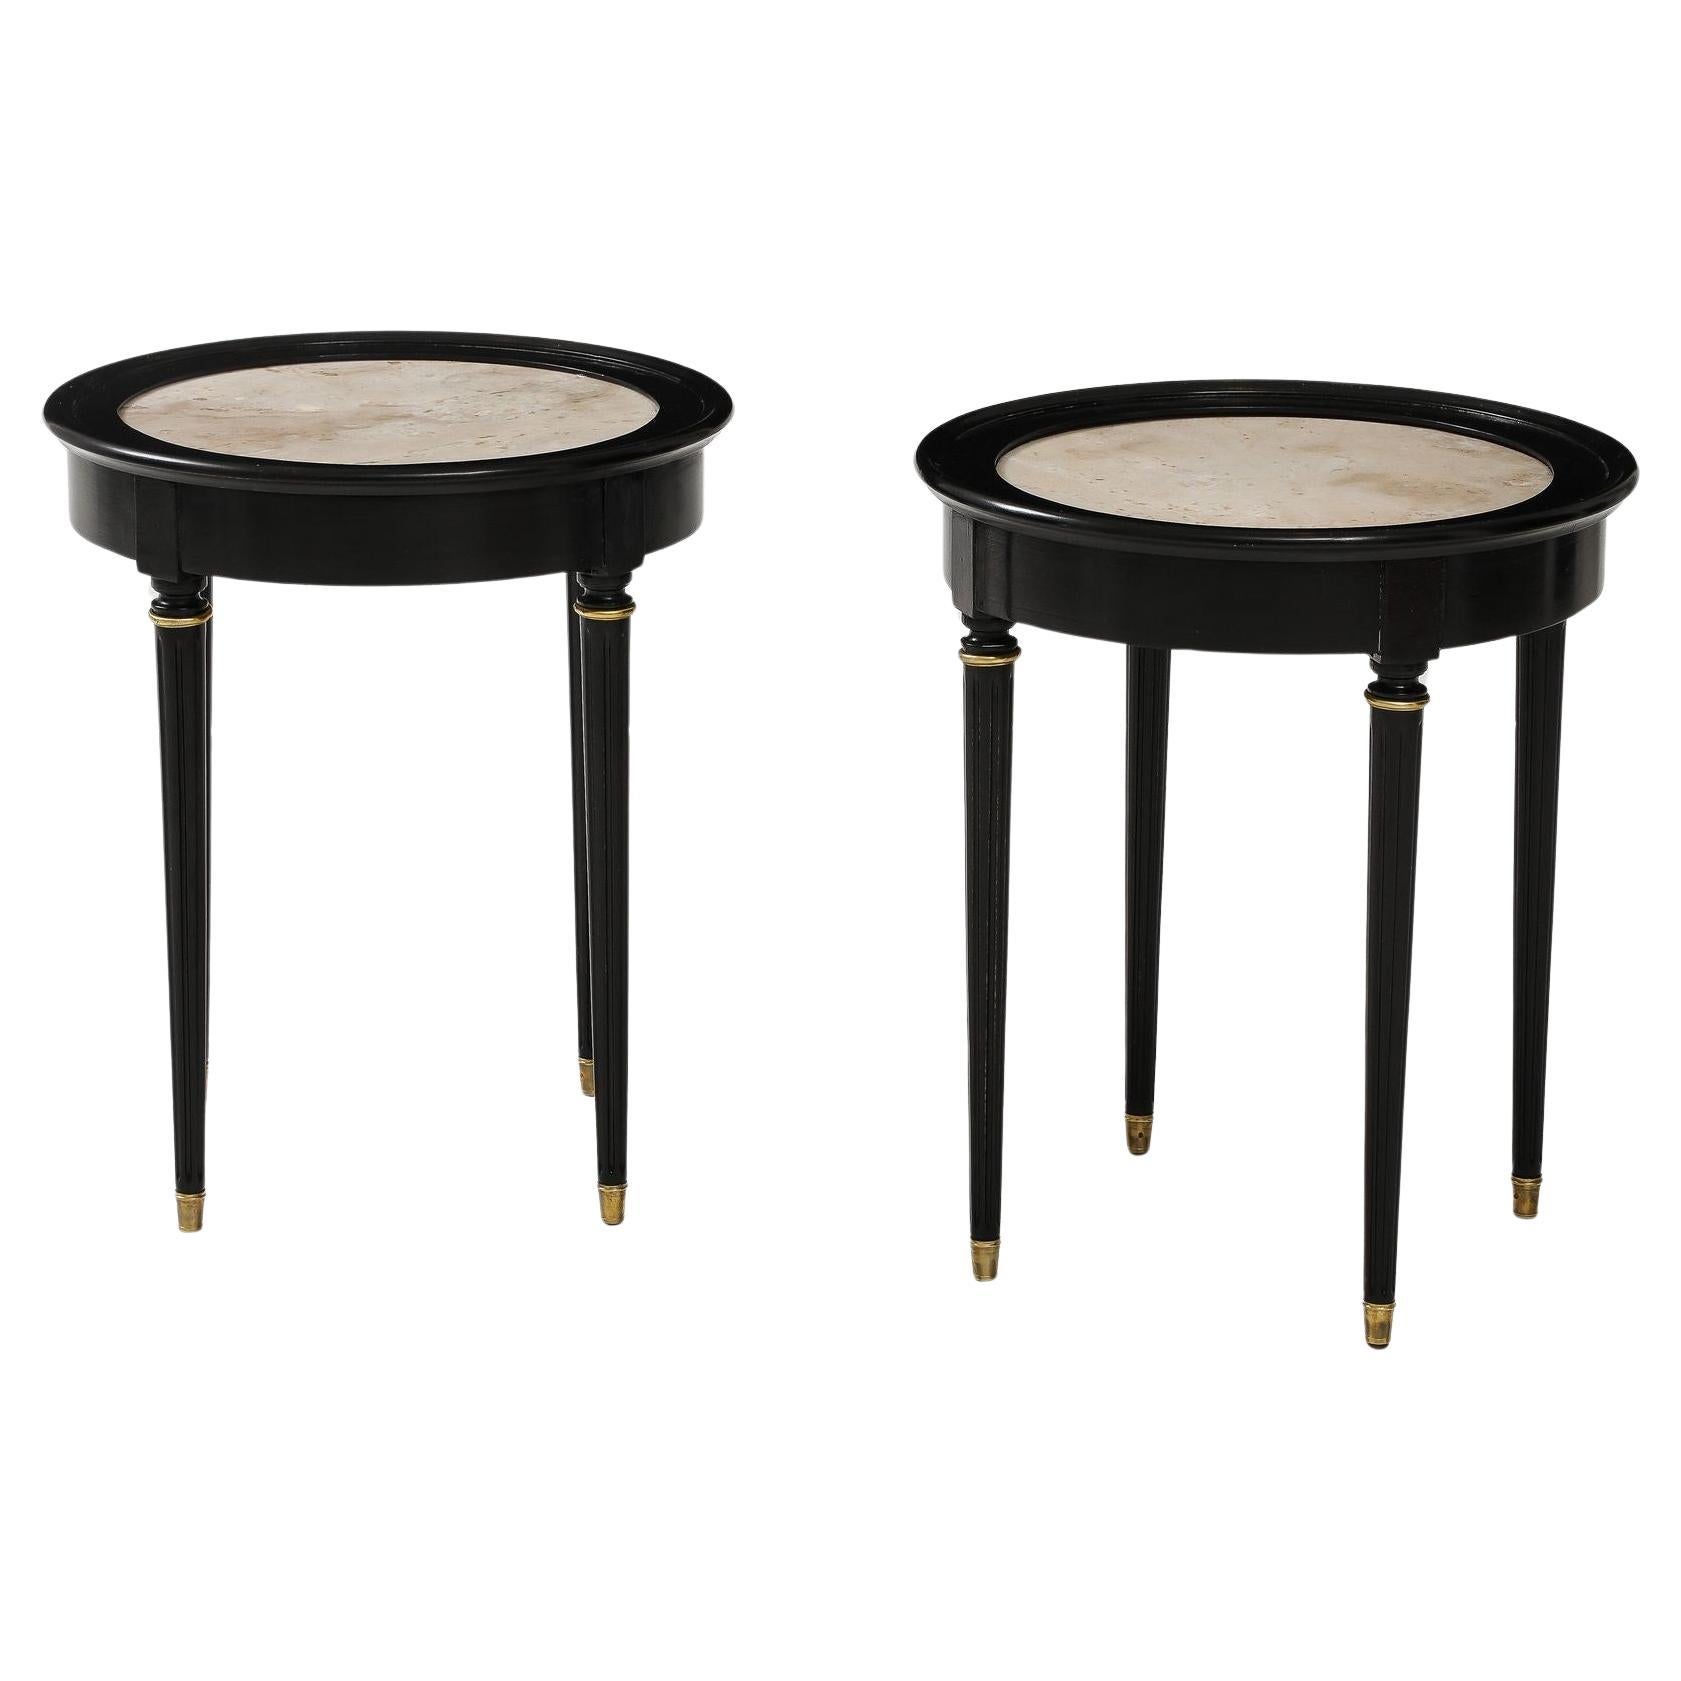 A great Pair of Black Lacquer Marble Top Circular Side Tables